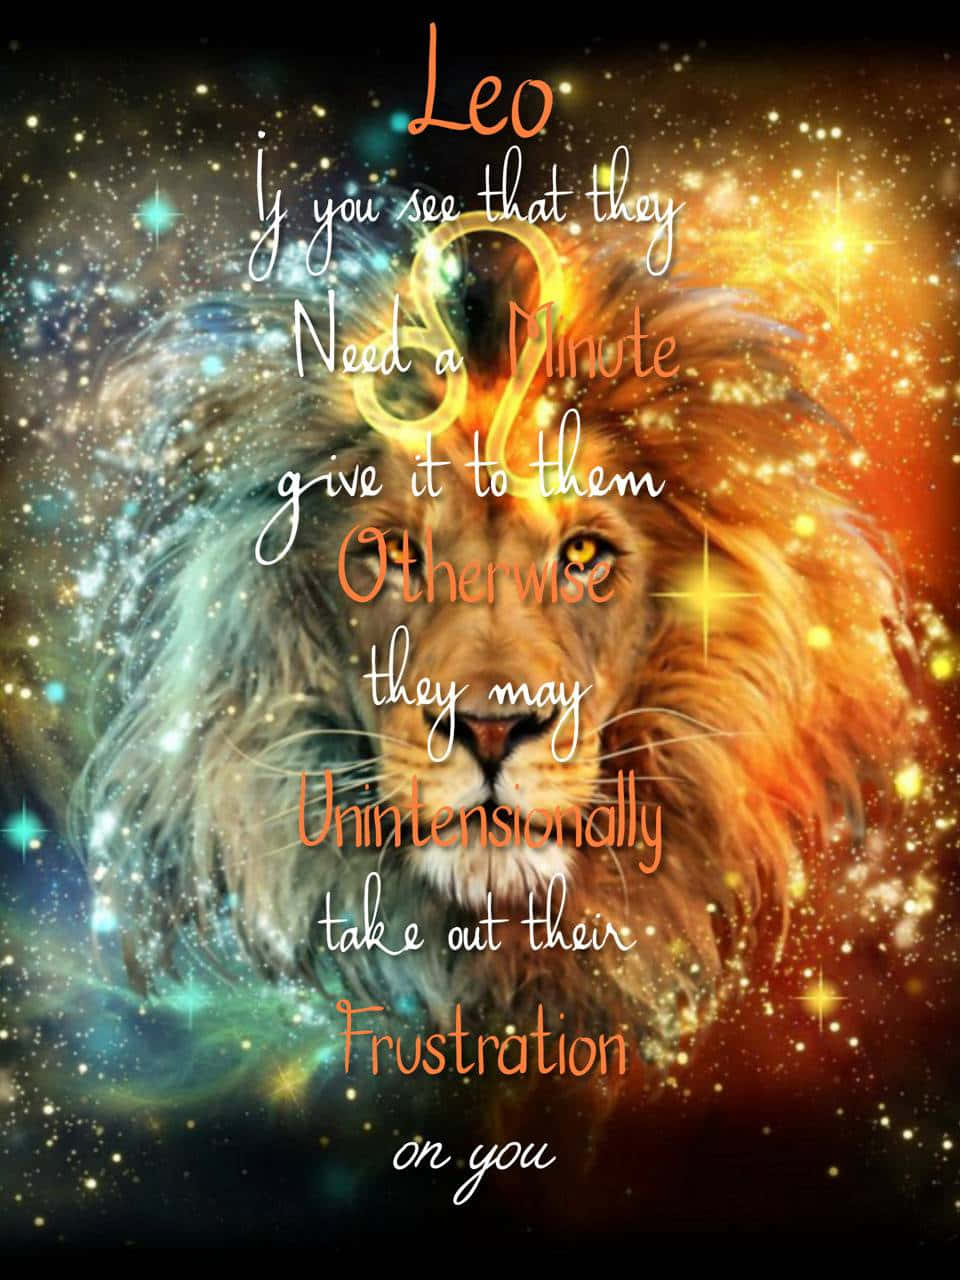 A Lion With The Words Leo